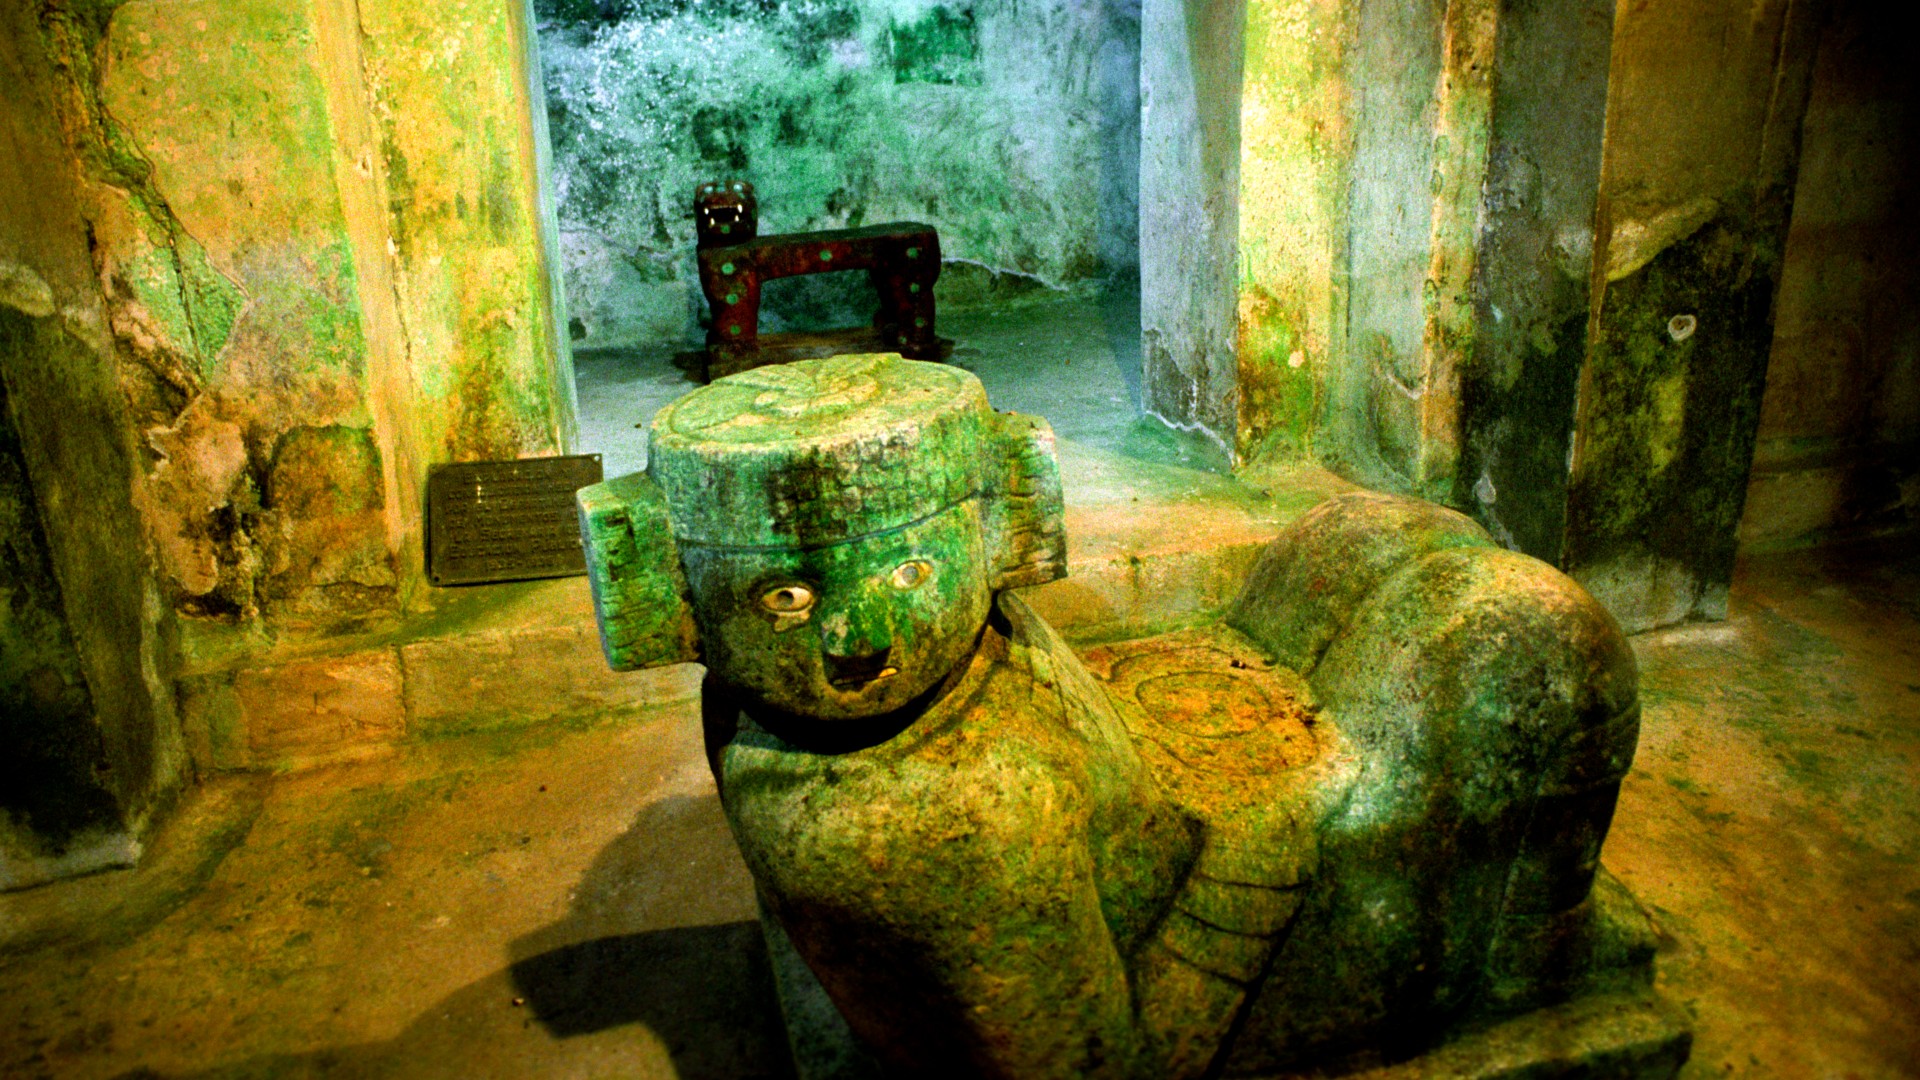 This photo shows the jaguar throne found inside